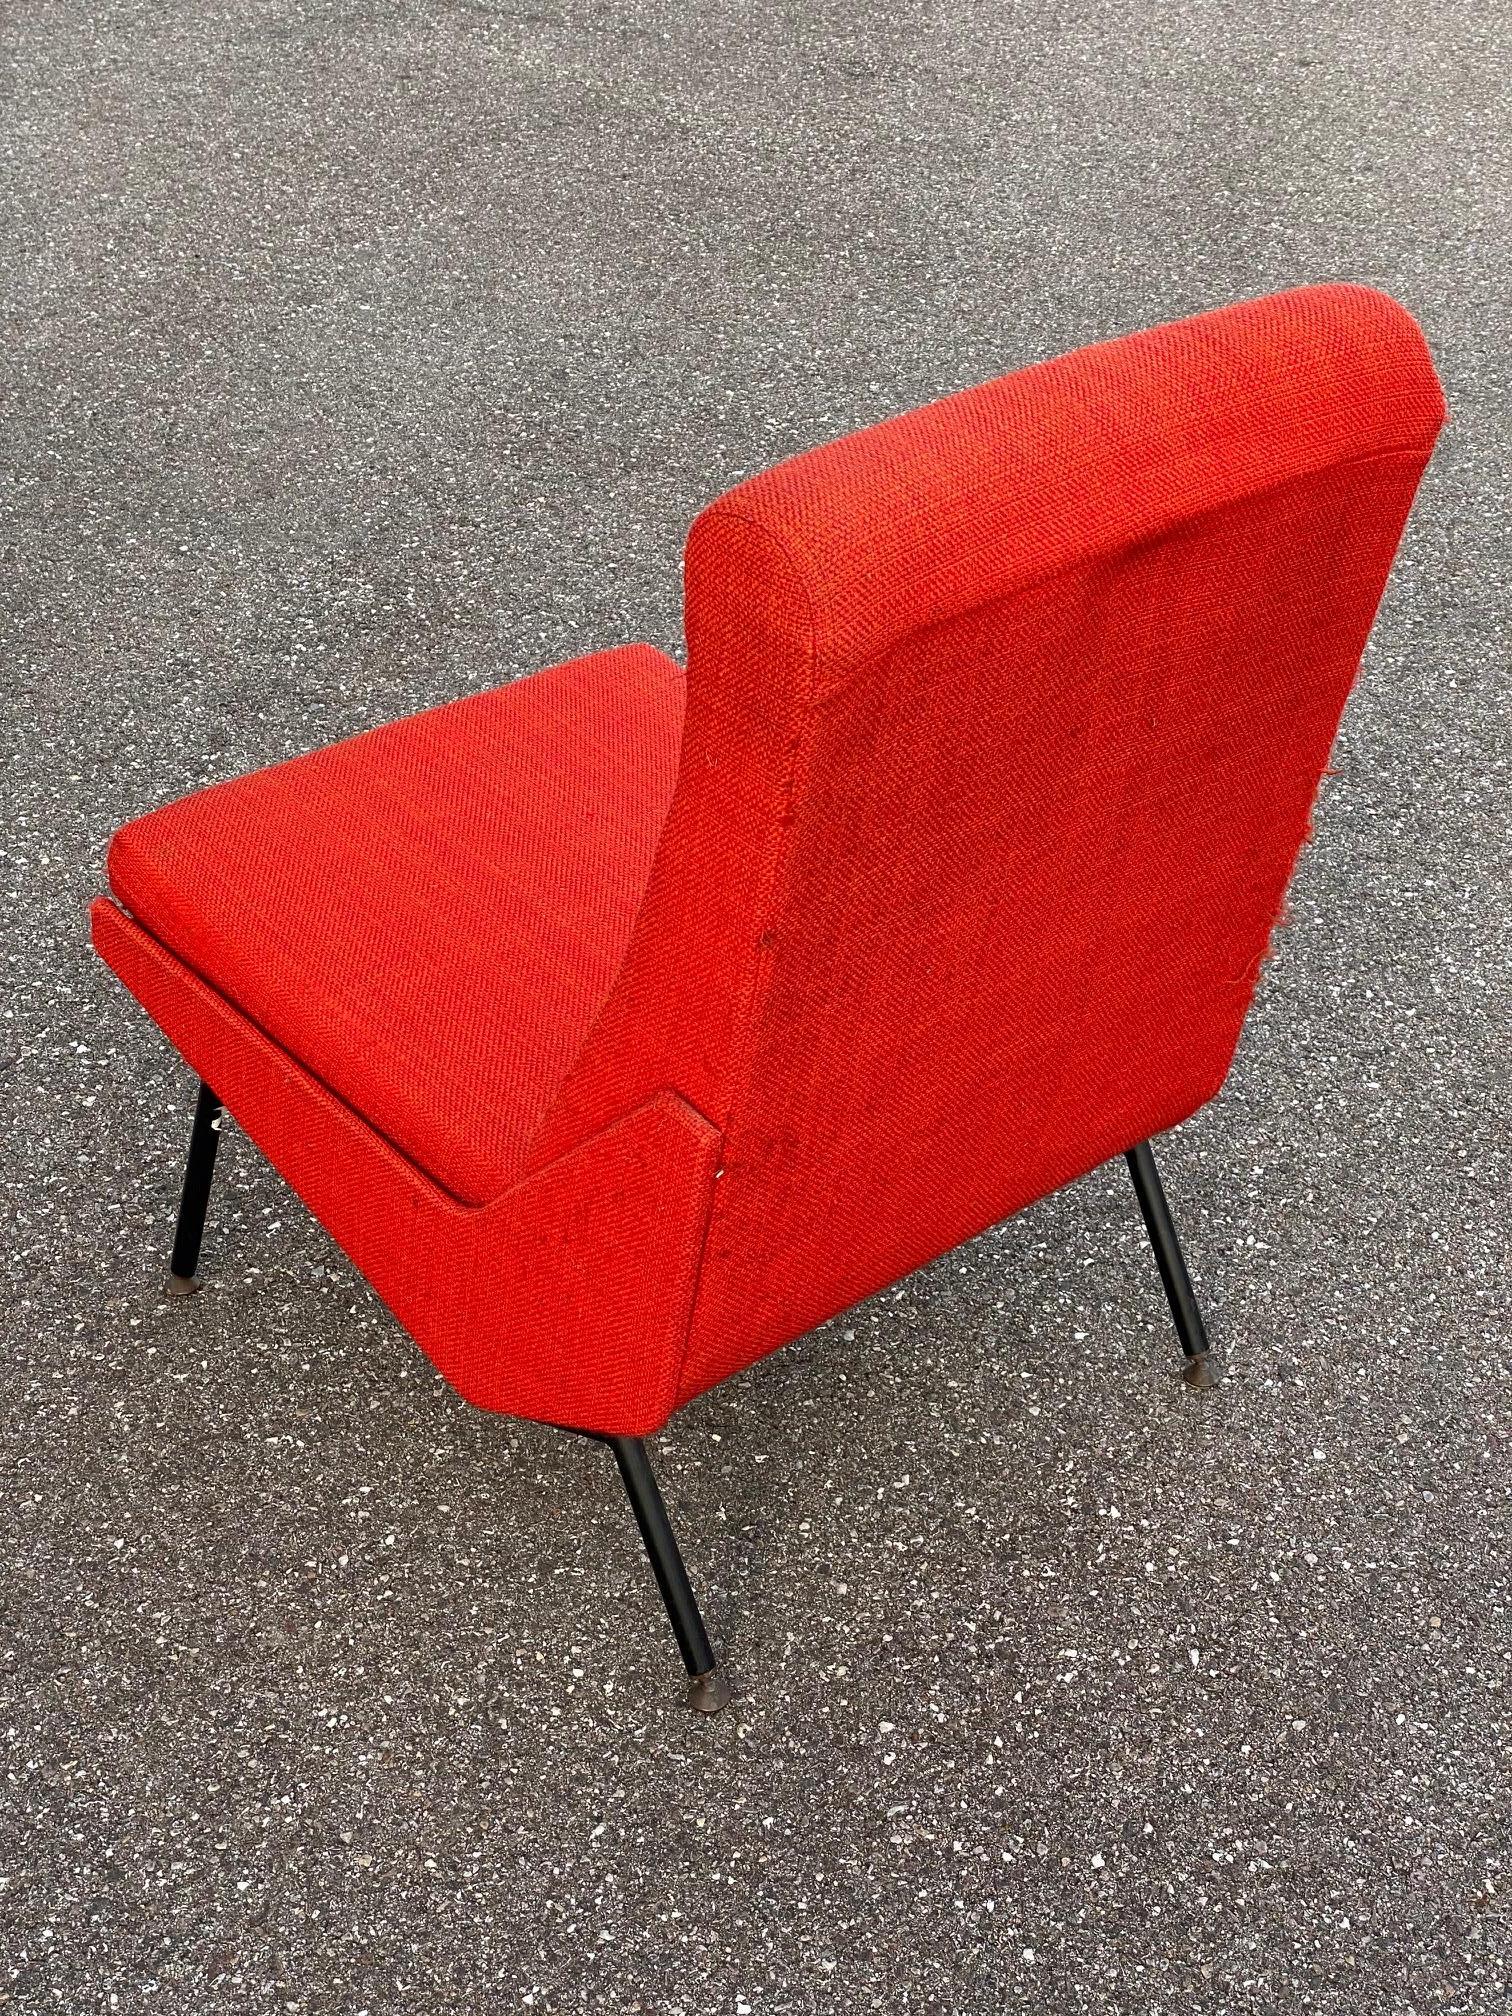 Mid-Century Modern Troika Slipper Chair by Pierre Guariche For Sale